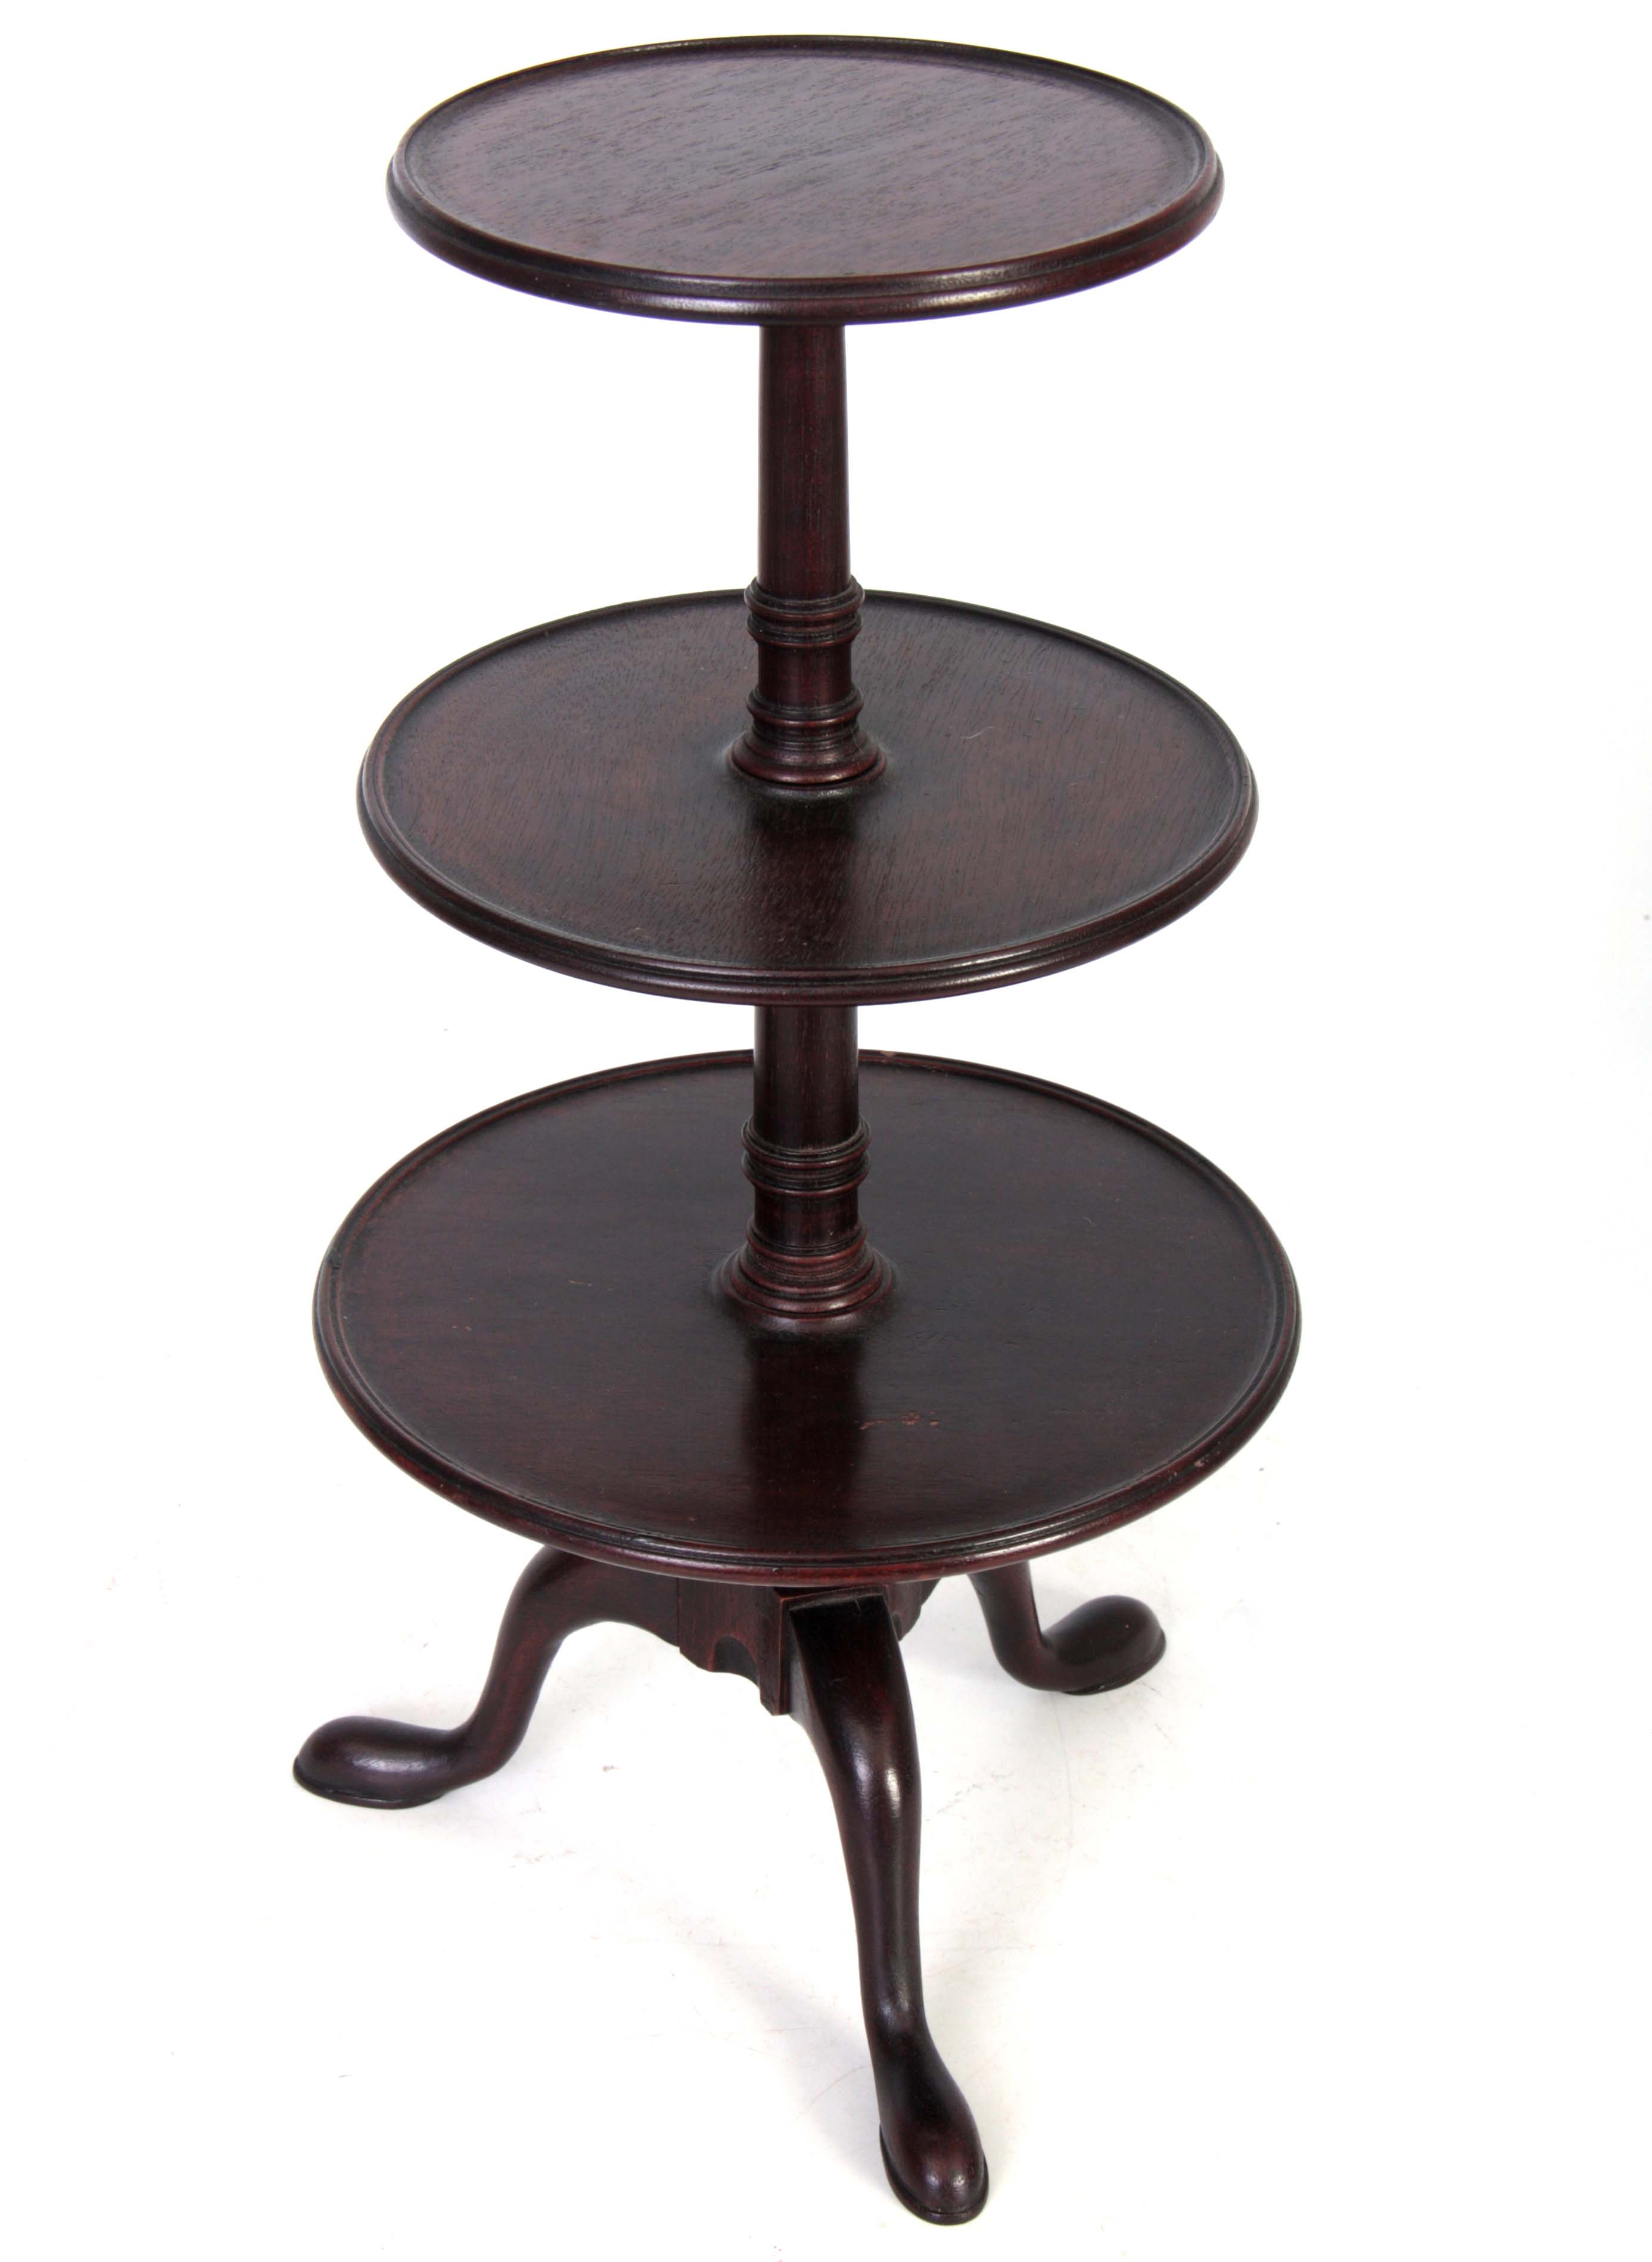 A 20TH CENTURY GEORGE III STYLE THREE TIER MAHOGANY DUMB WAITER with revolving lower tiers and